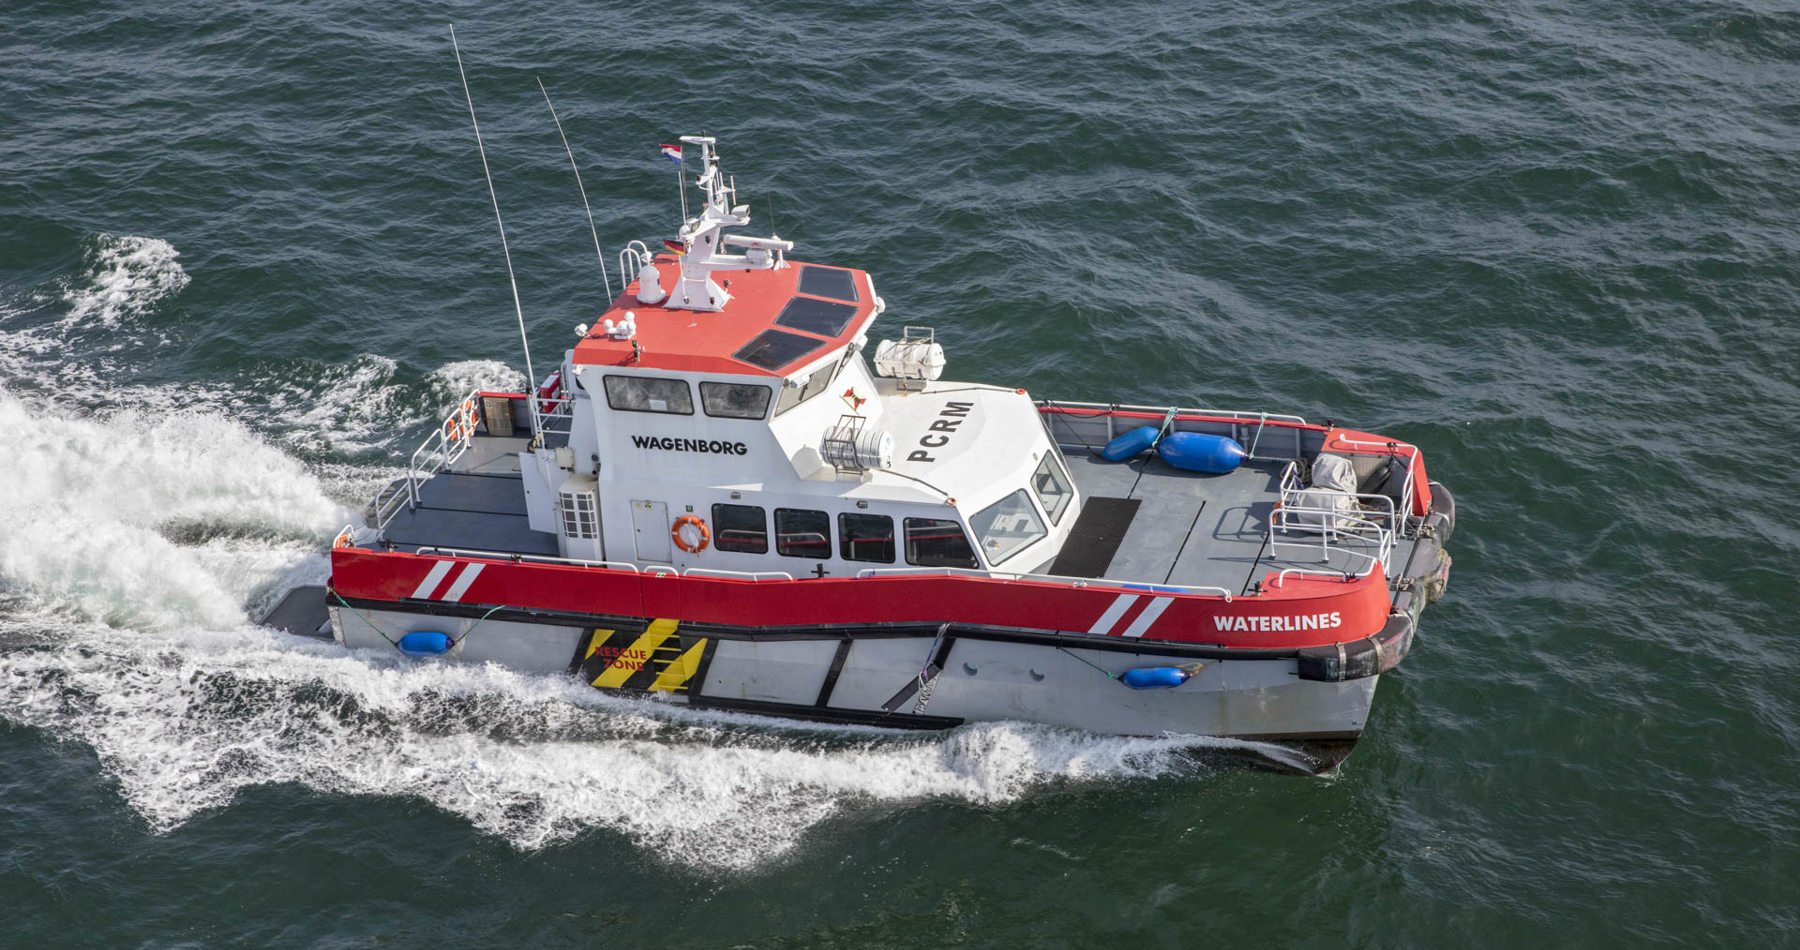 Crew transfer vessel ‘Waterlines’ gets second life within Wagenborg